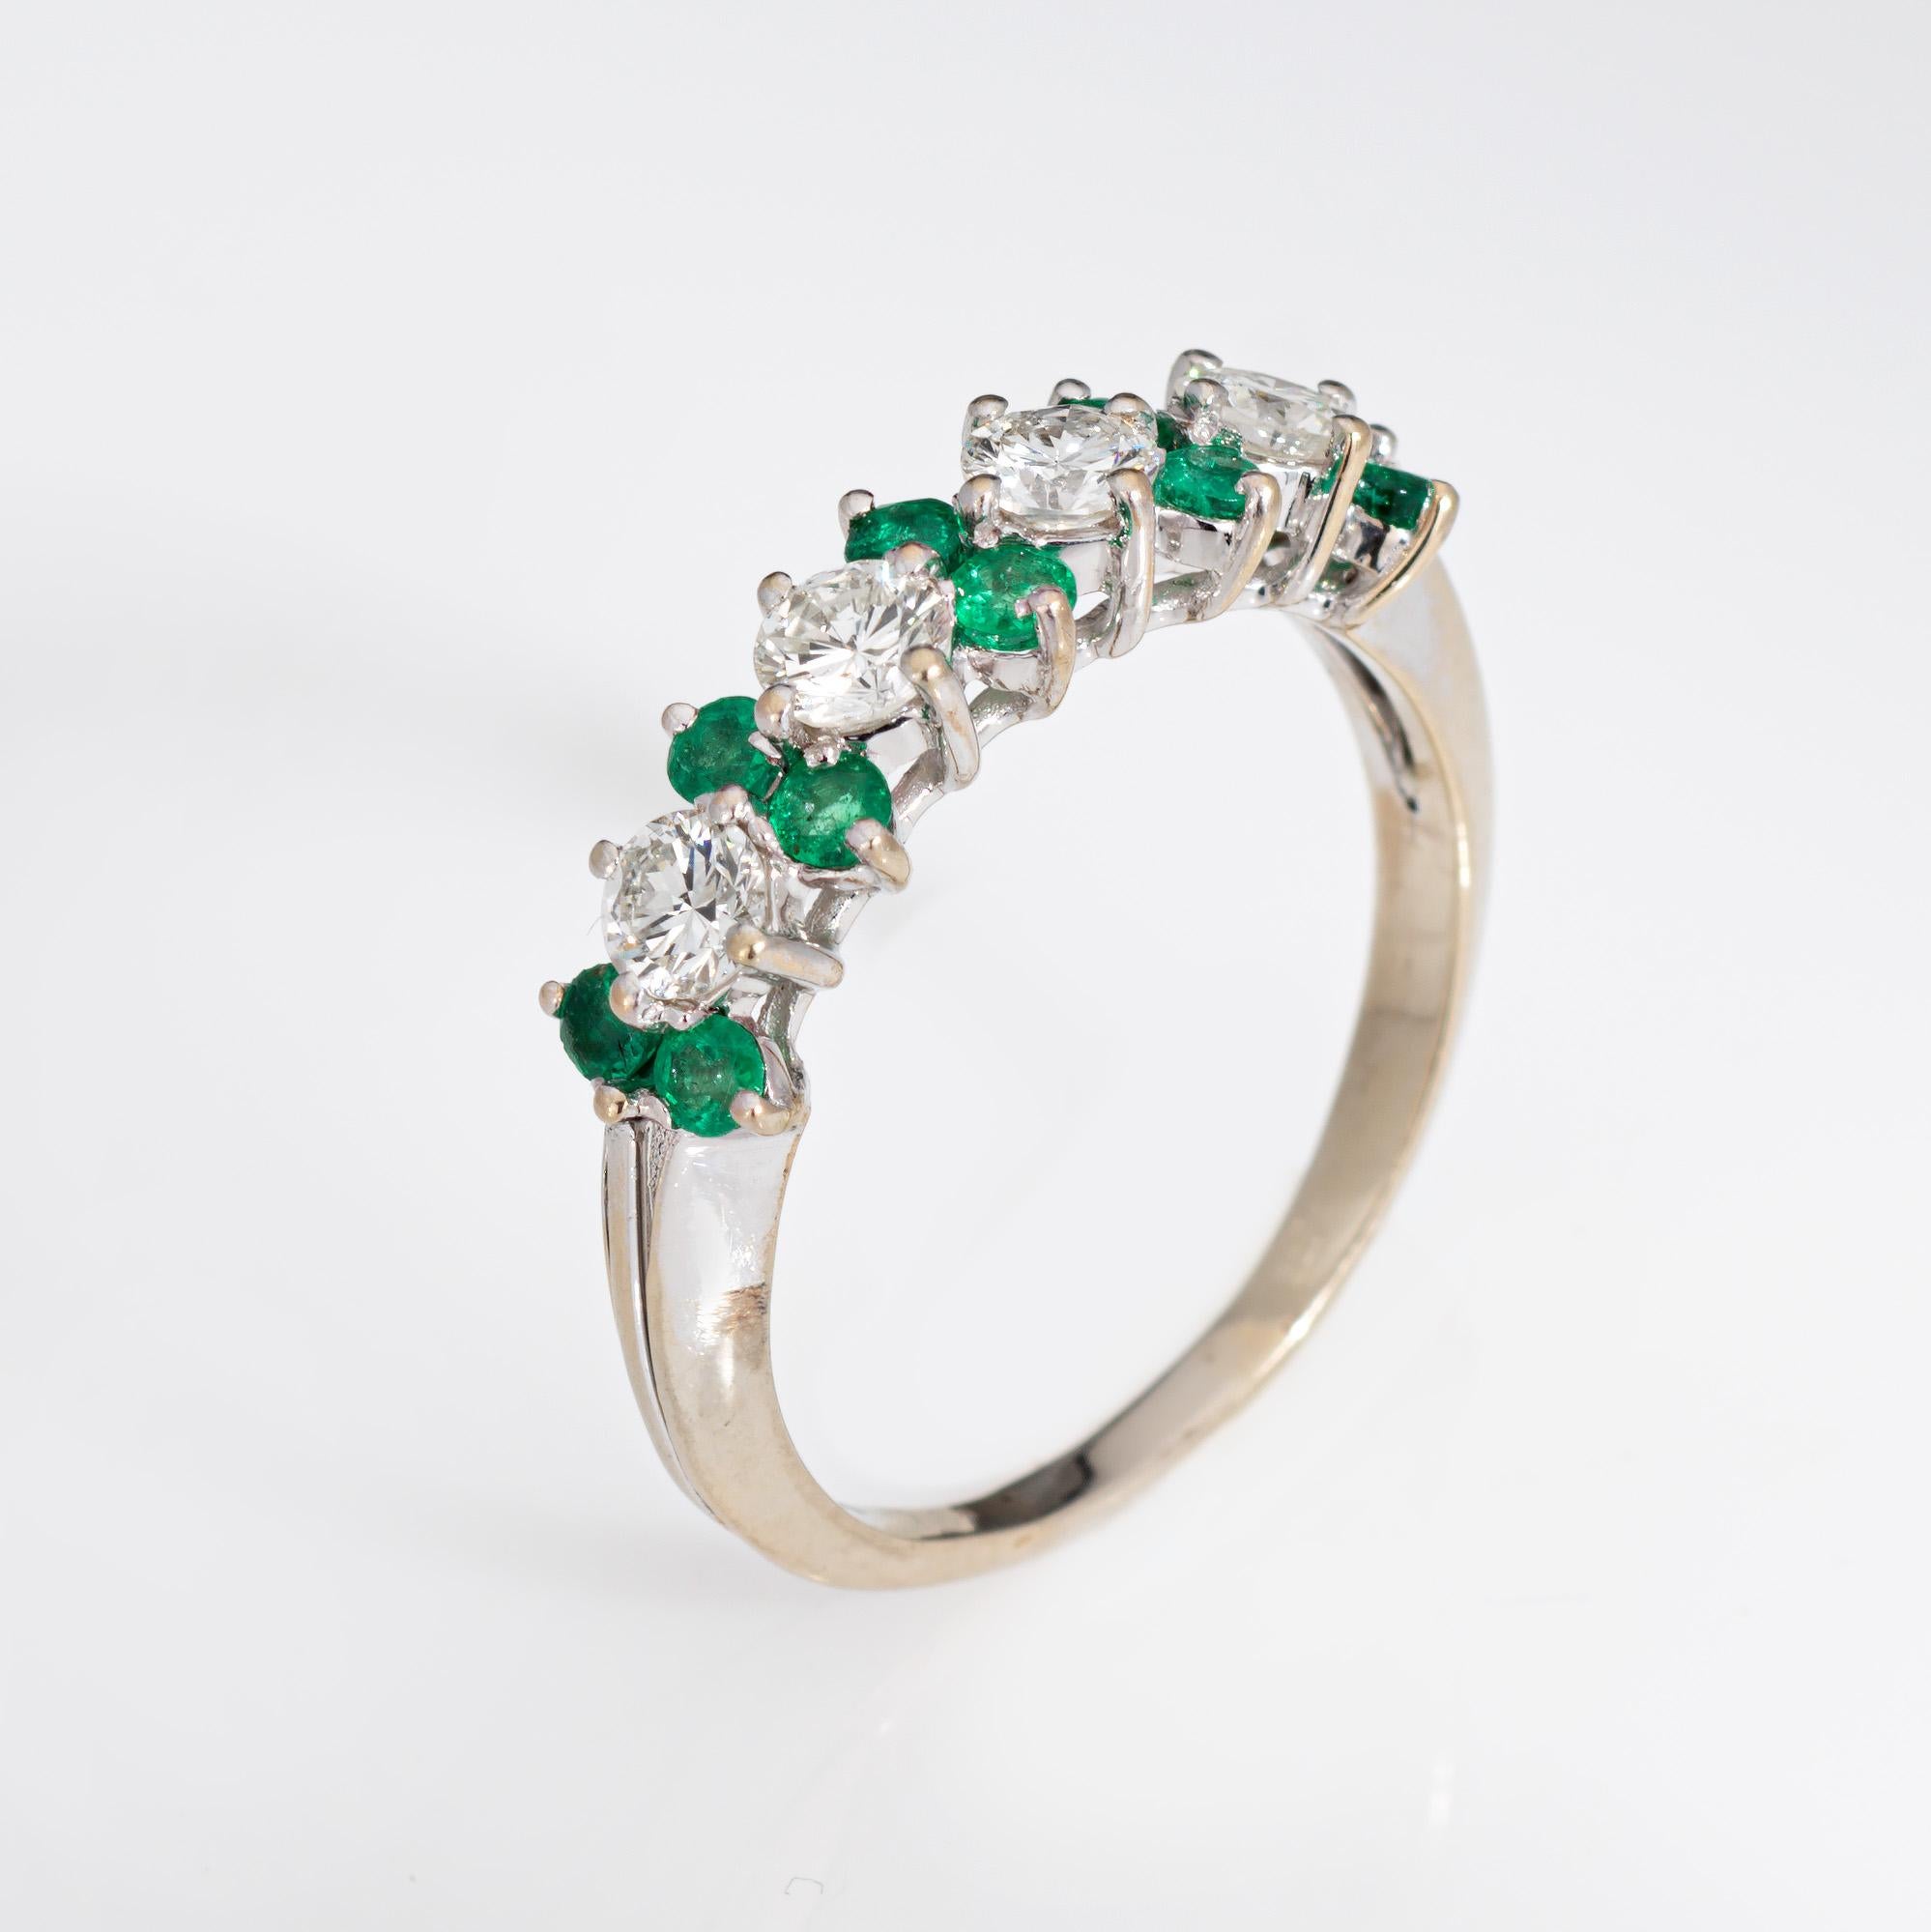 Stylish and finely detailed diamond & emerald ring crafted in 18 karat white gold.

Four diamonds total an estimated 0.60 carats (estimated at H-I color and VS2-SI1 clarity). Emeralds measure approx. 2mm each. The emeralds are in good condition and